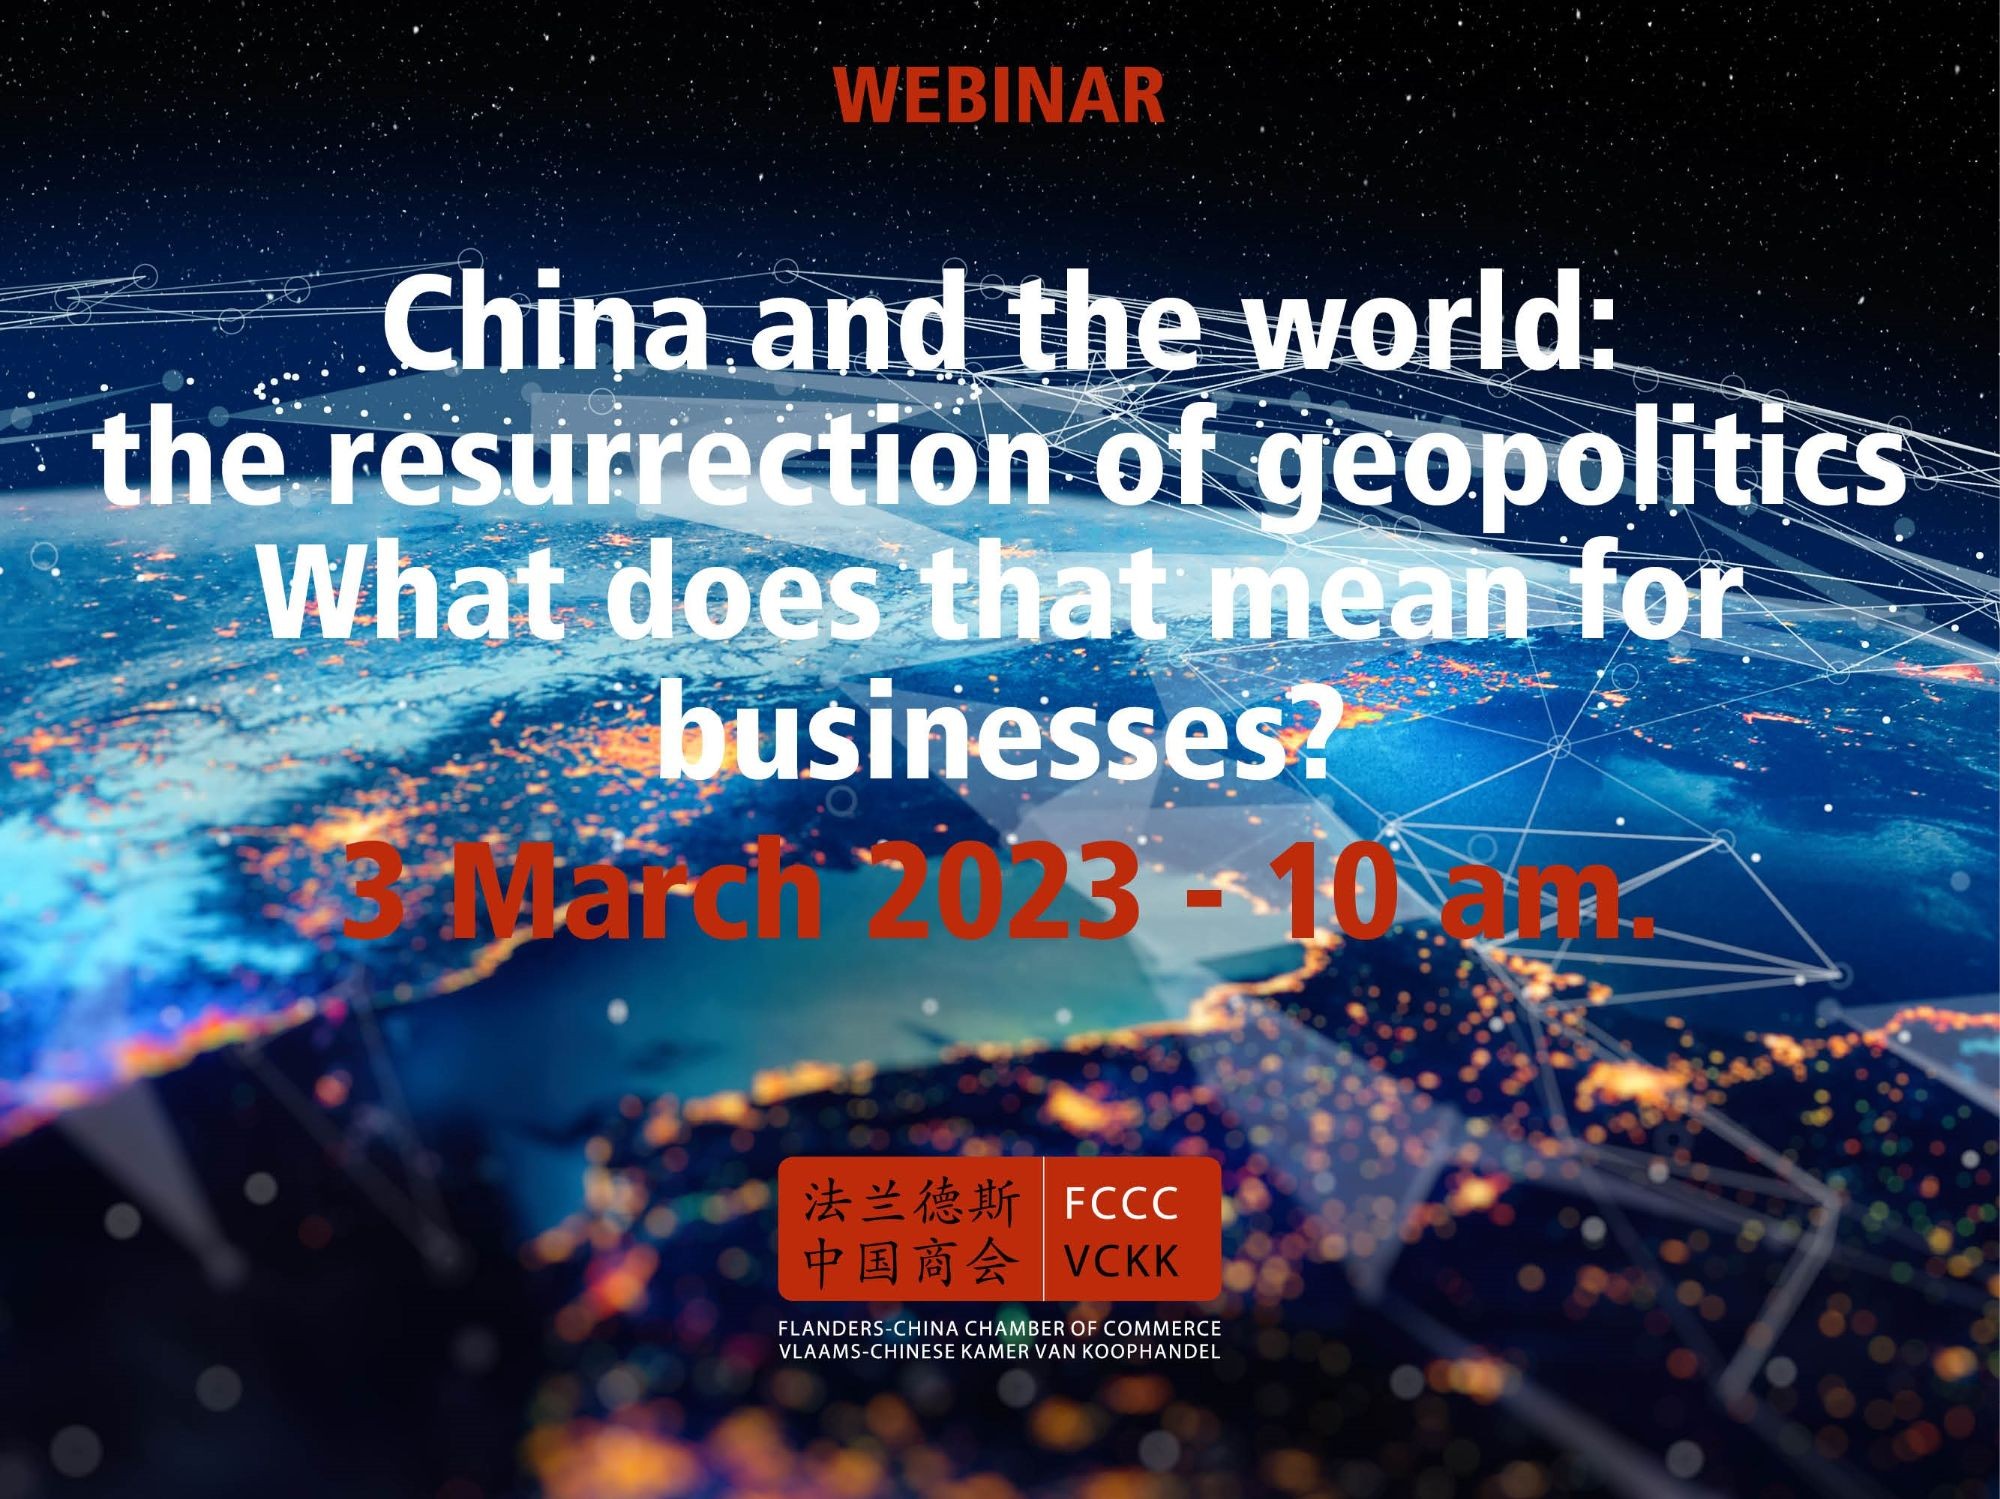 Webinar: China and the world: the resurrection of geopolitics. What does that mean for businesses? - 3 March 2023 - 10h00 CET